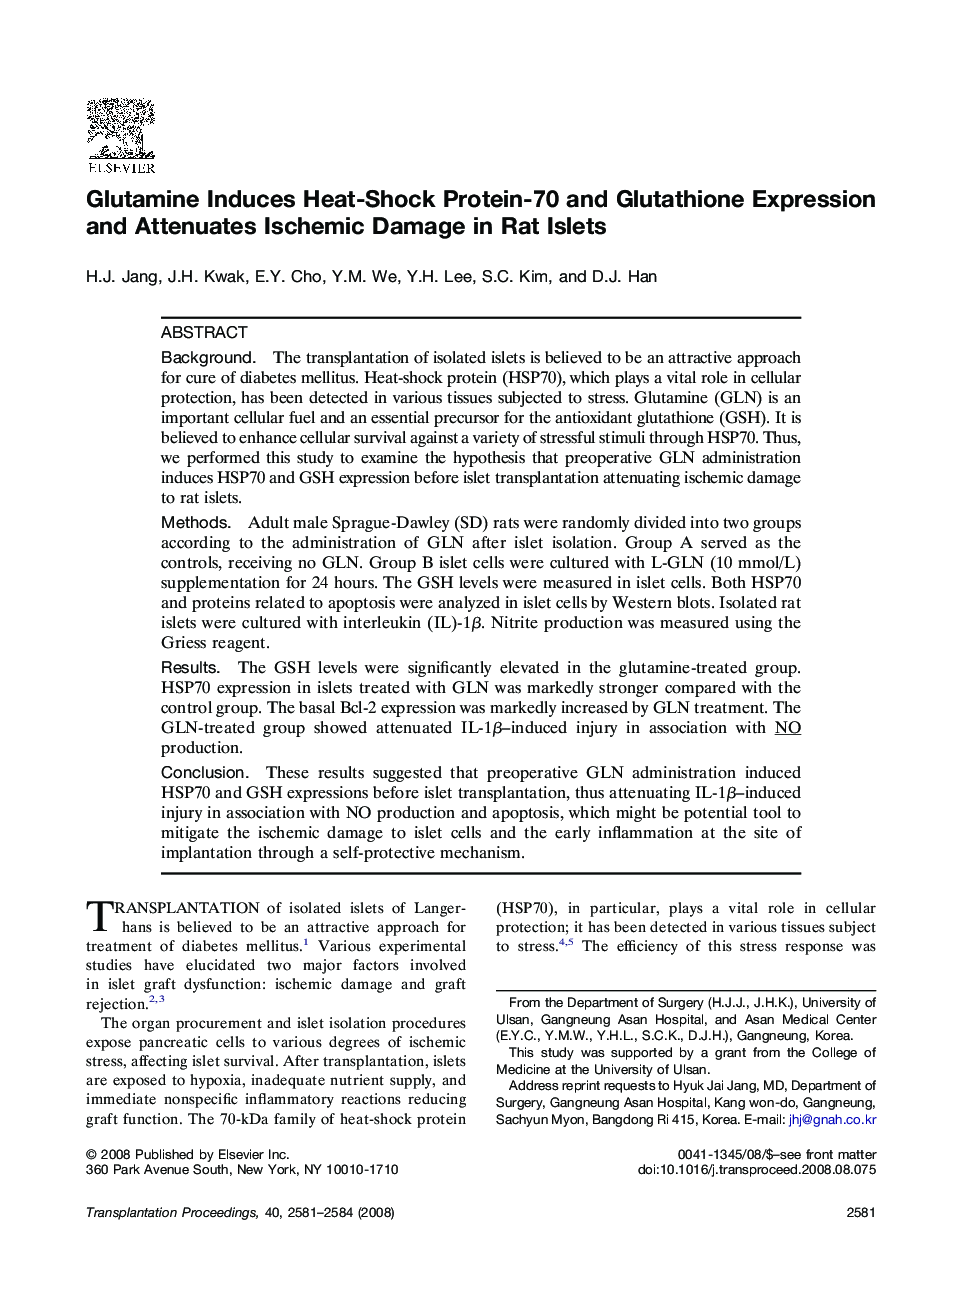 Glutamine Induces Heat-Shock Protein-70 and Glutathione Expression and Attenuates Ischemic Damage in Rat Islets 